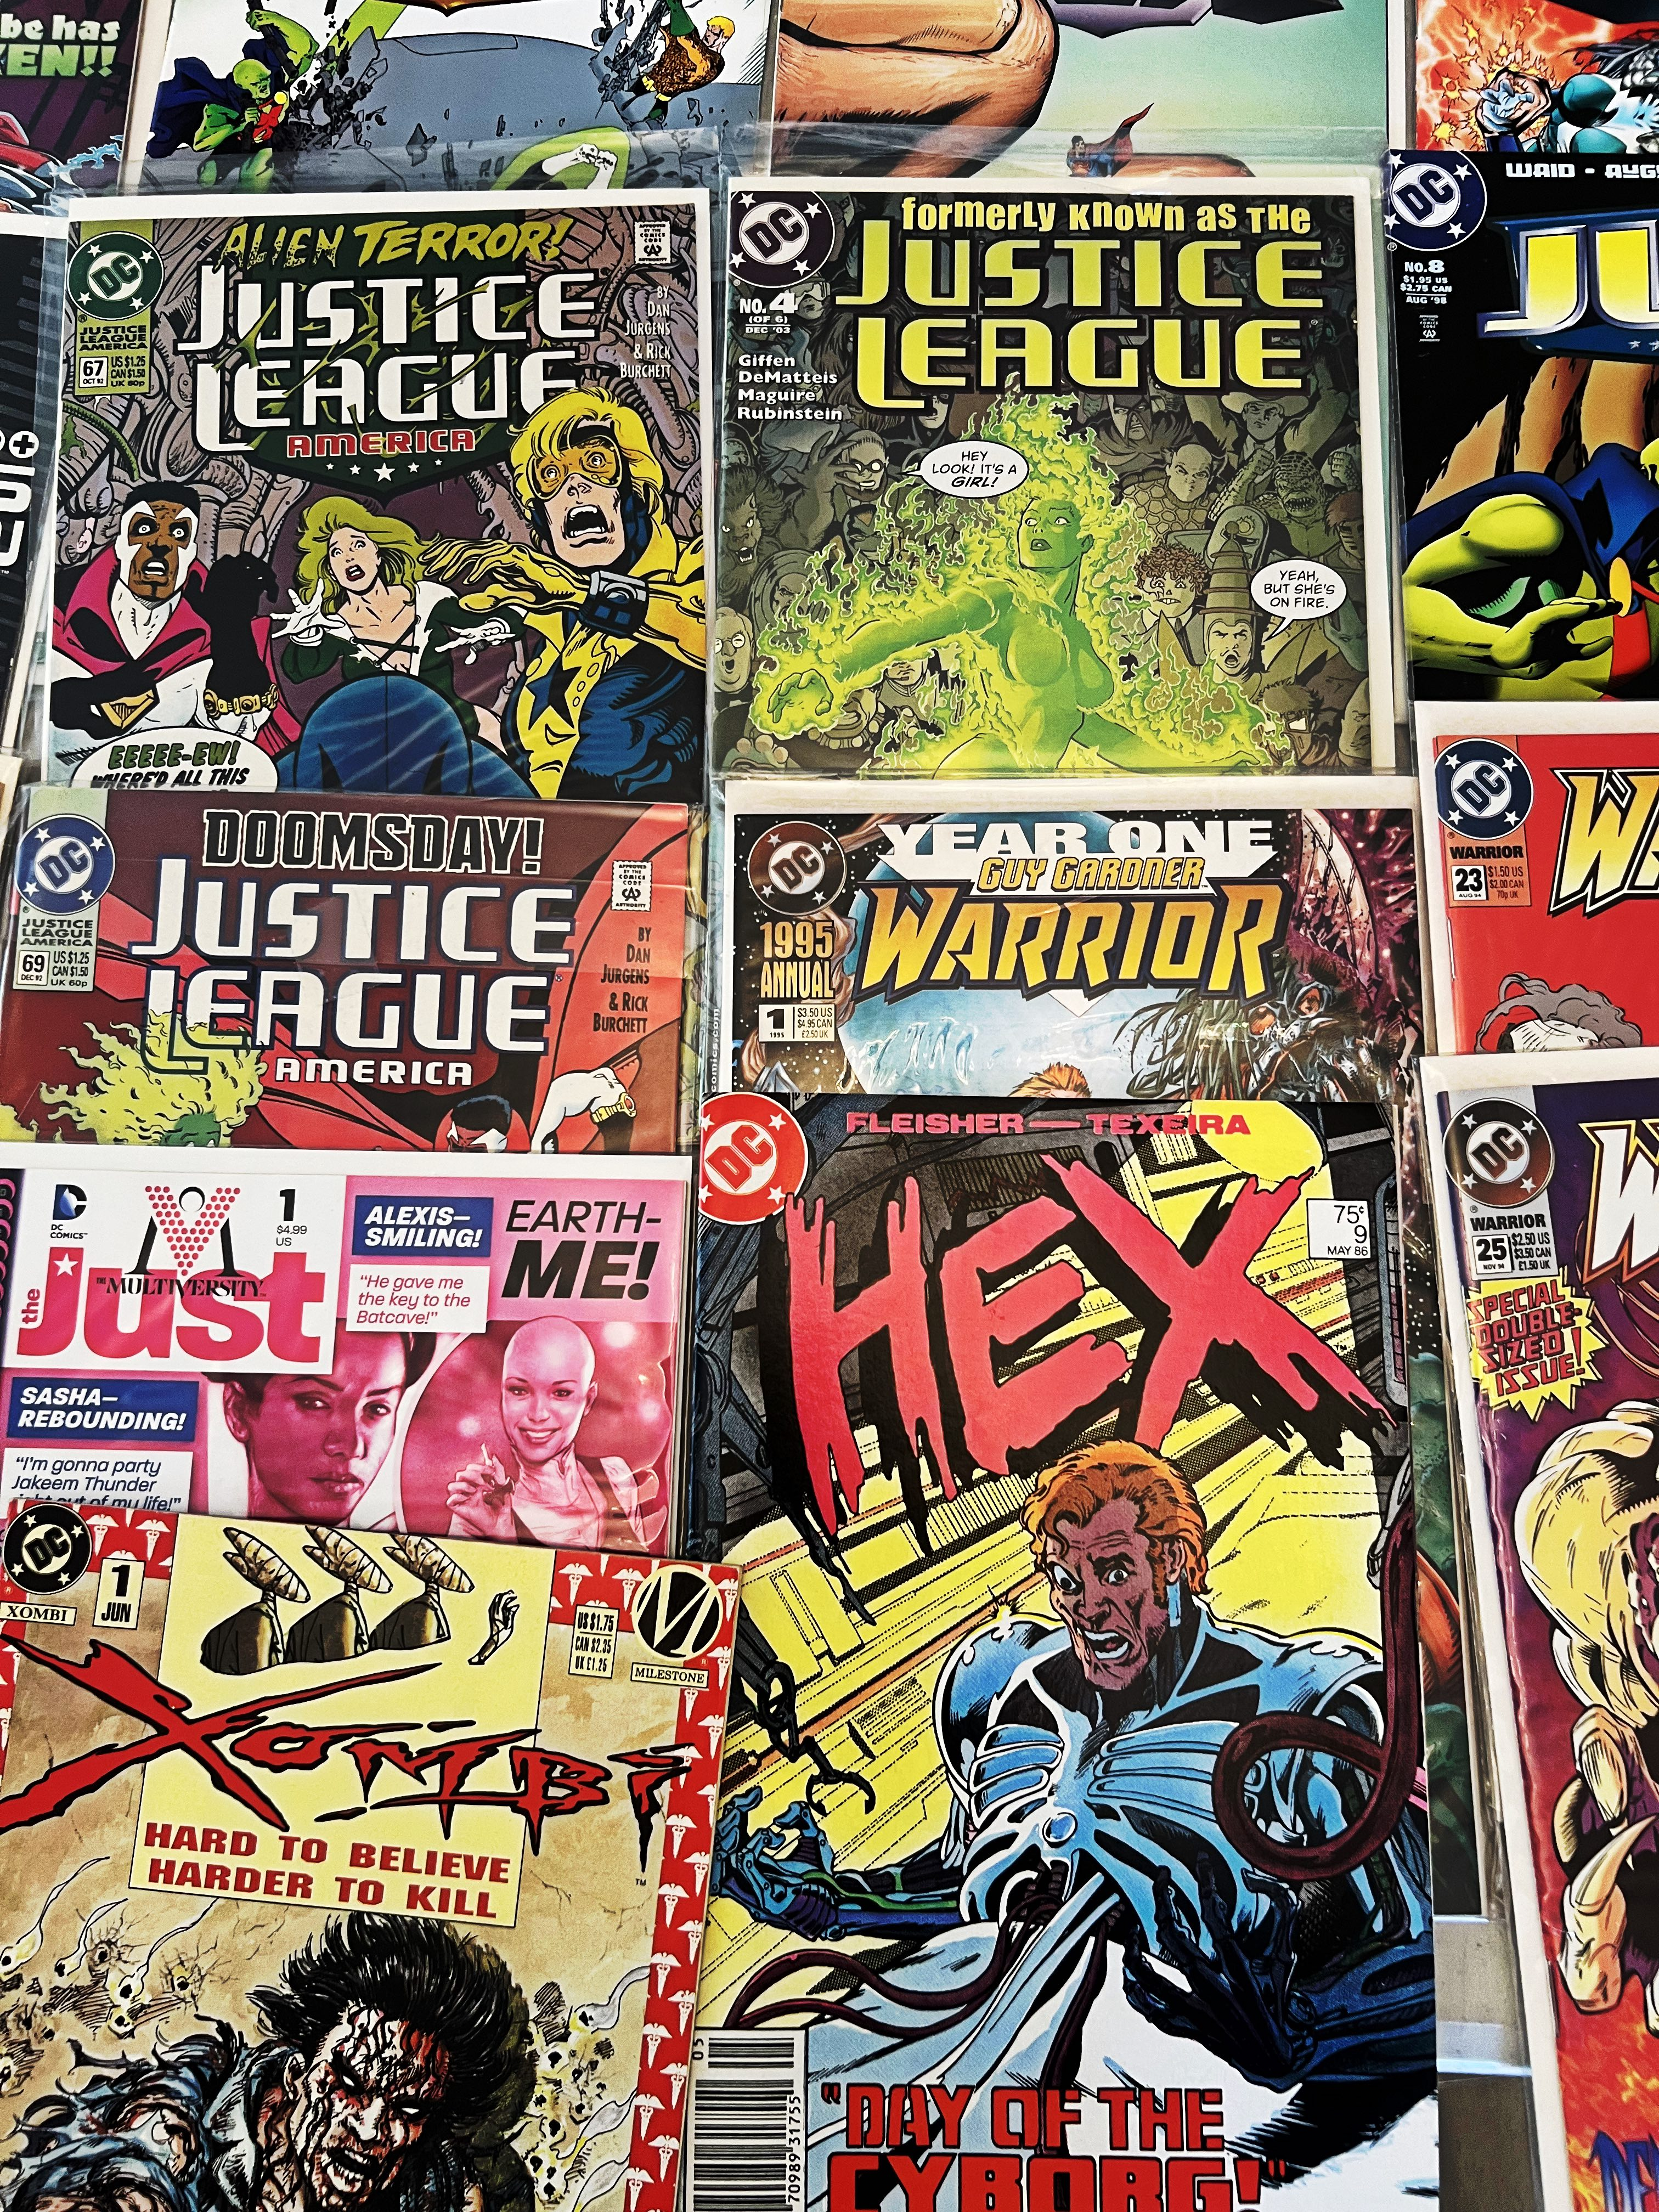 COMIC BOOK COLLECTION LOT 30 VF